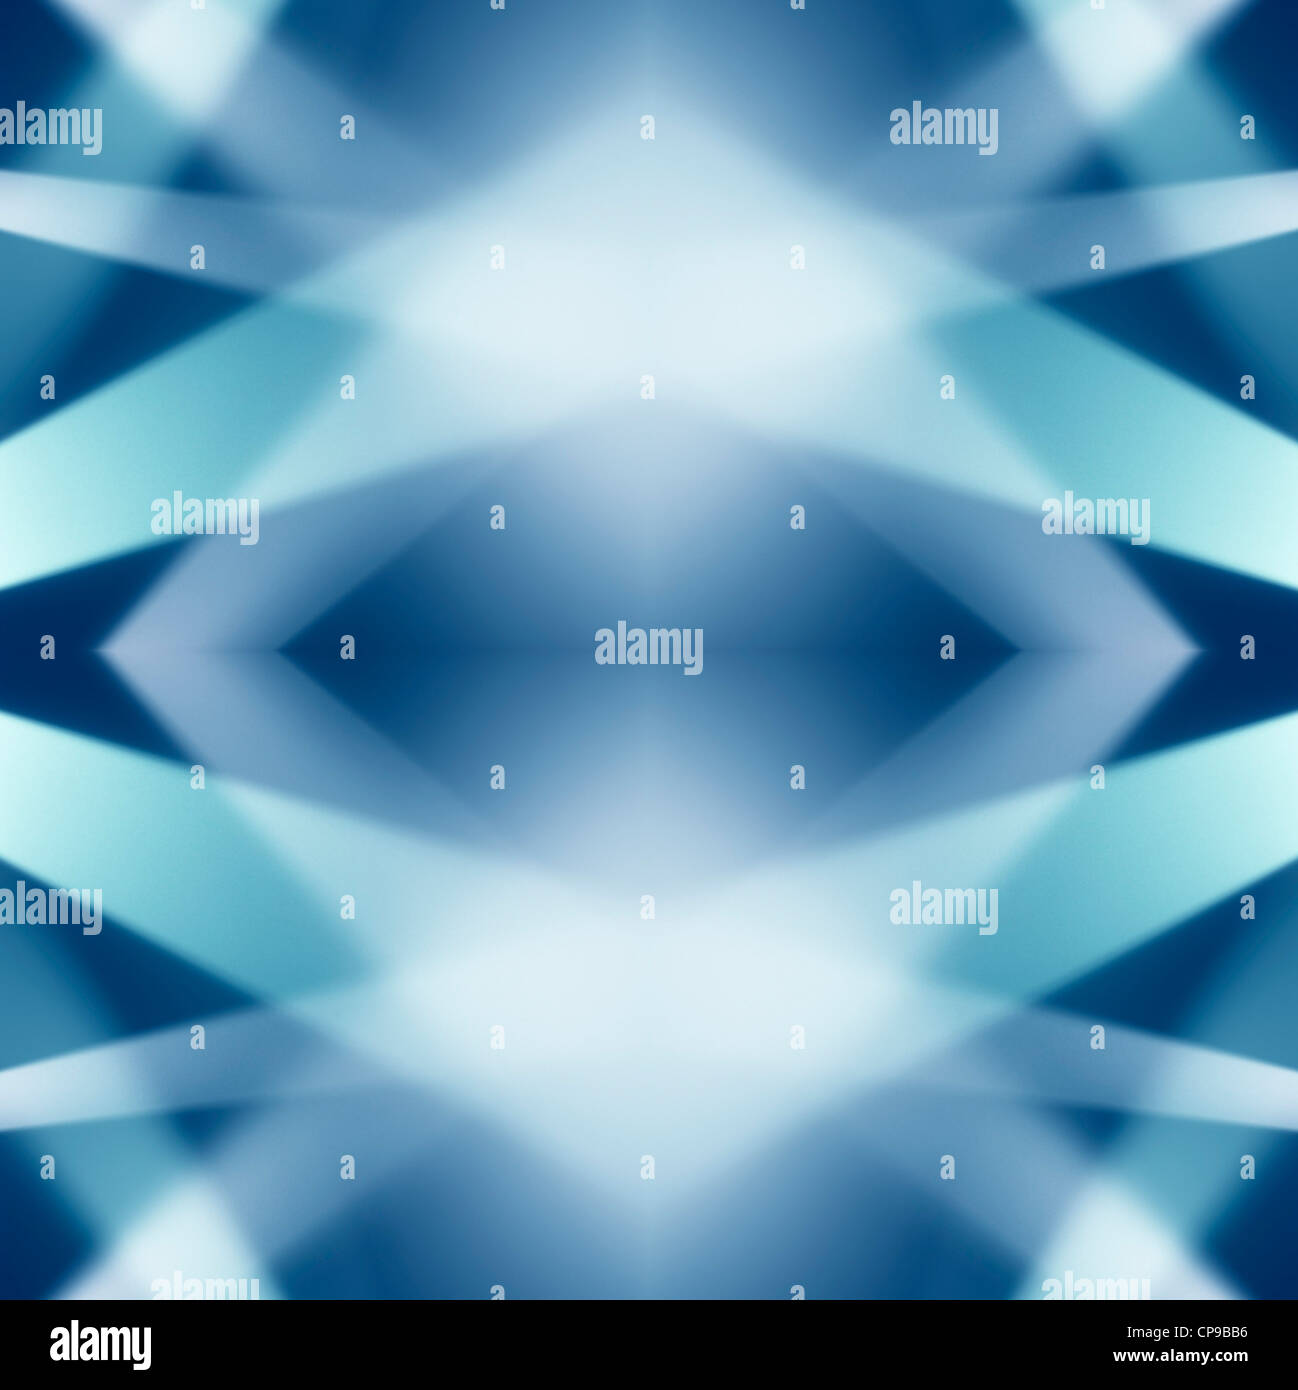 Abstract Reflected Light Ray Background Stock Photo